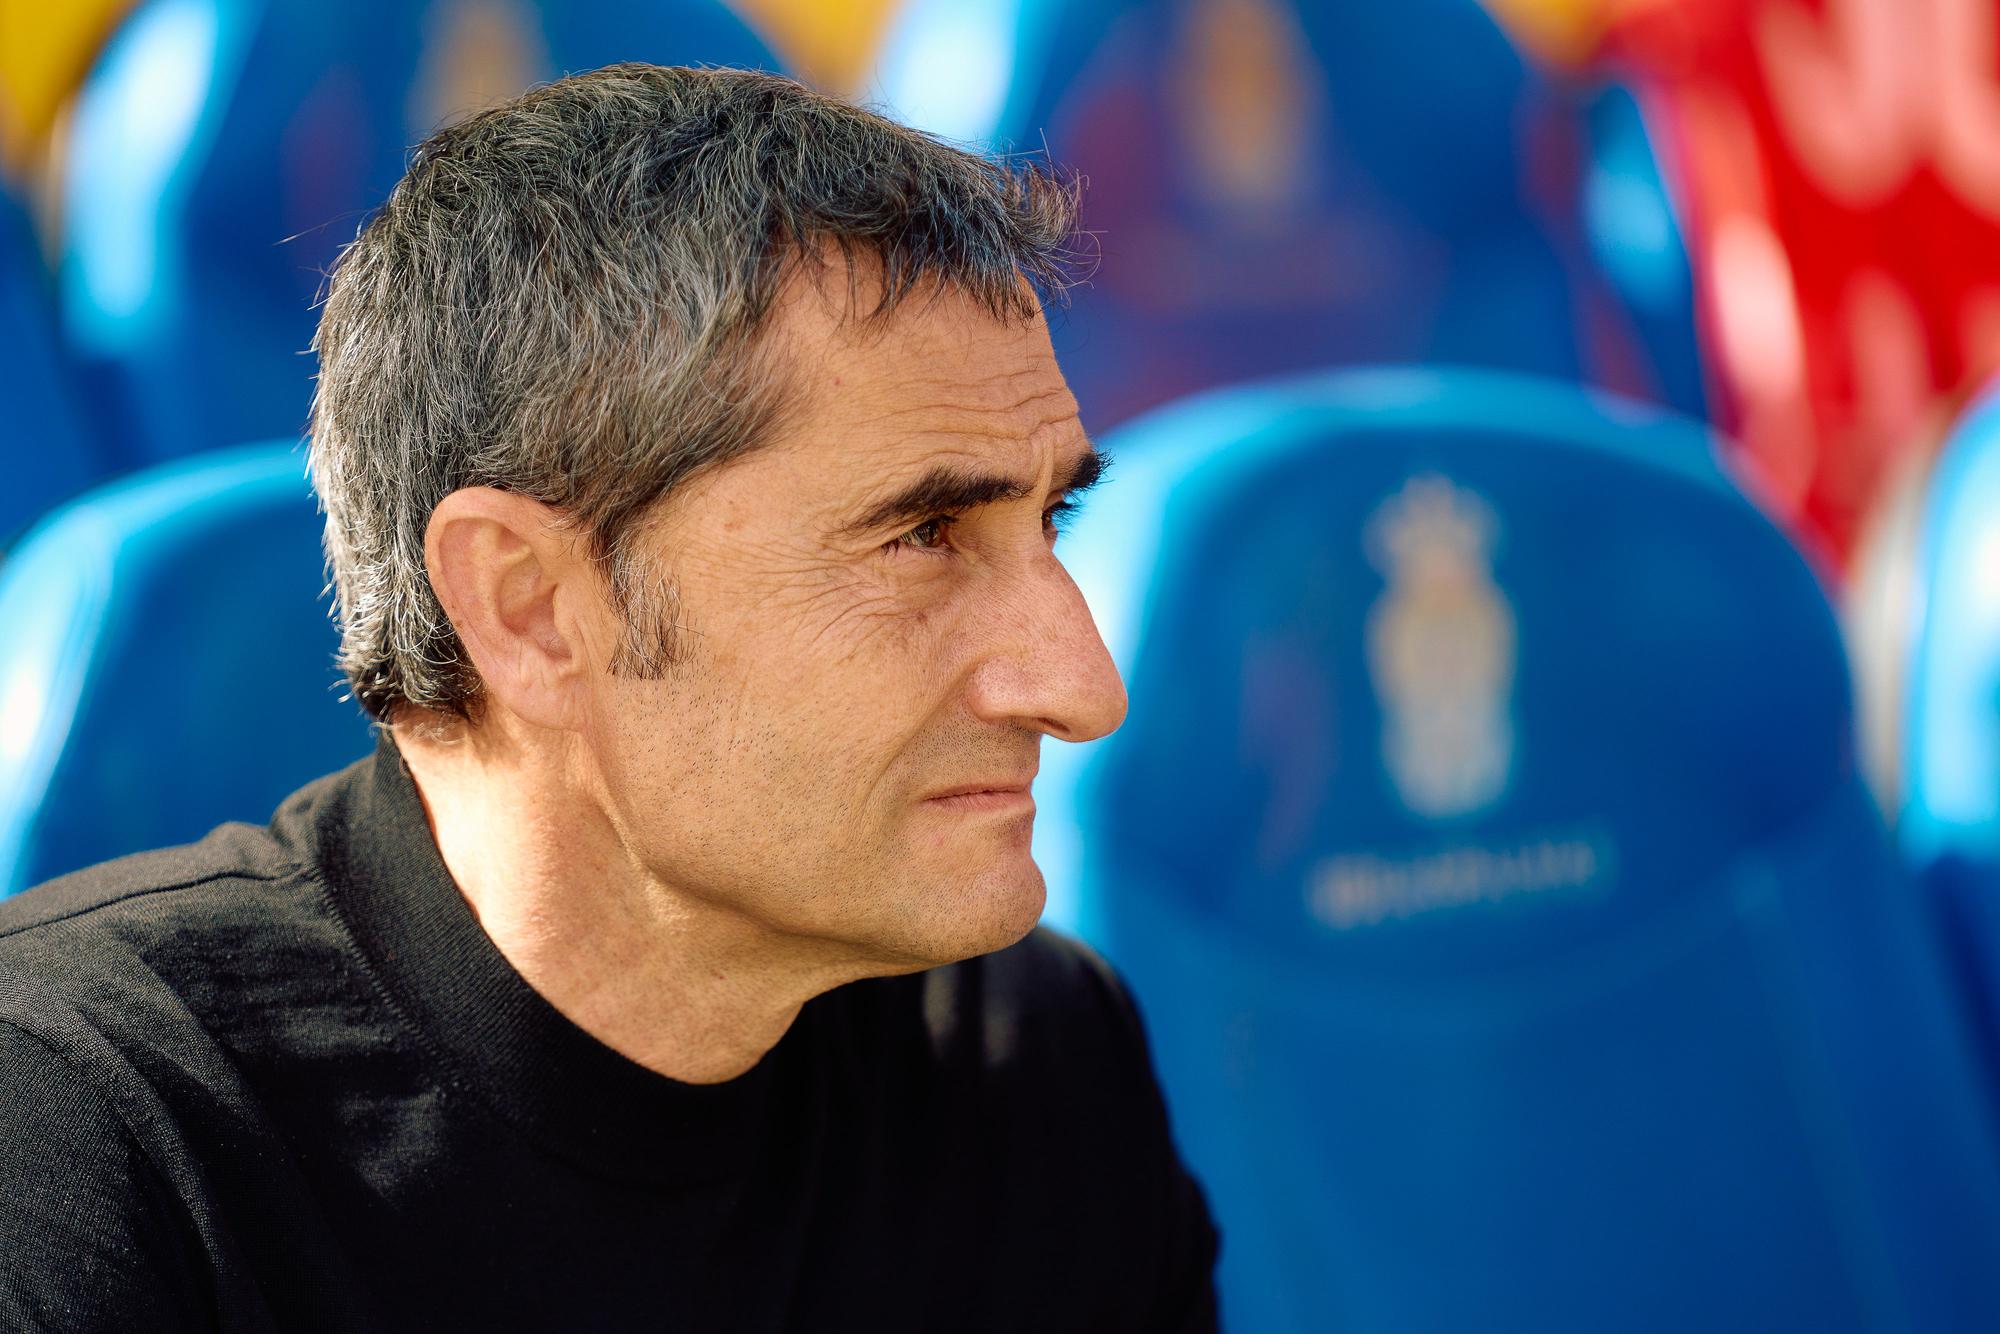 Ernesto Valverde, head coach of Athletic Club looks on during the Spanish league, La Liga EA Sports, football match played between UD Las Palmas and Athletic Club at Estadio Gran Canaria on March 10, 2024, in Las Palmas de Gran Canaria, Spain. AFP7 10/03/2024 ONLY FOR USE IN SPAIN / Gabriel Jimenez / AFP7 / Europa Press;2024;SOCCER;Sport;ZSOCCER;ZSPORT;UD Las Palmas v Athletic Club - La Liga EA Sports;